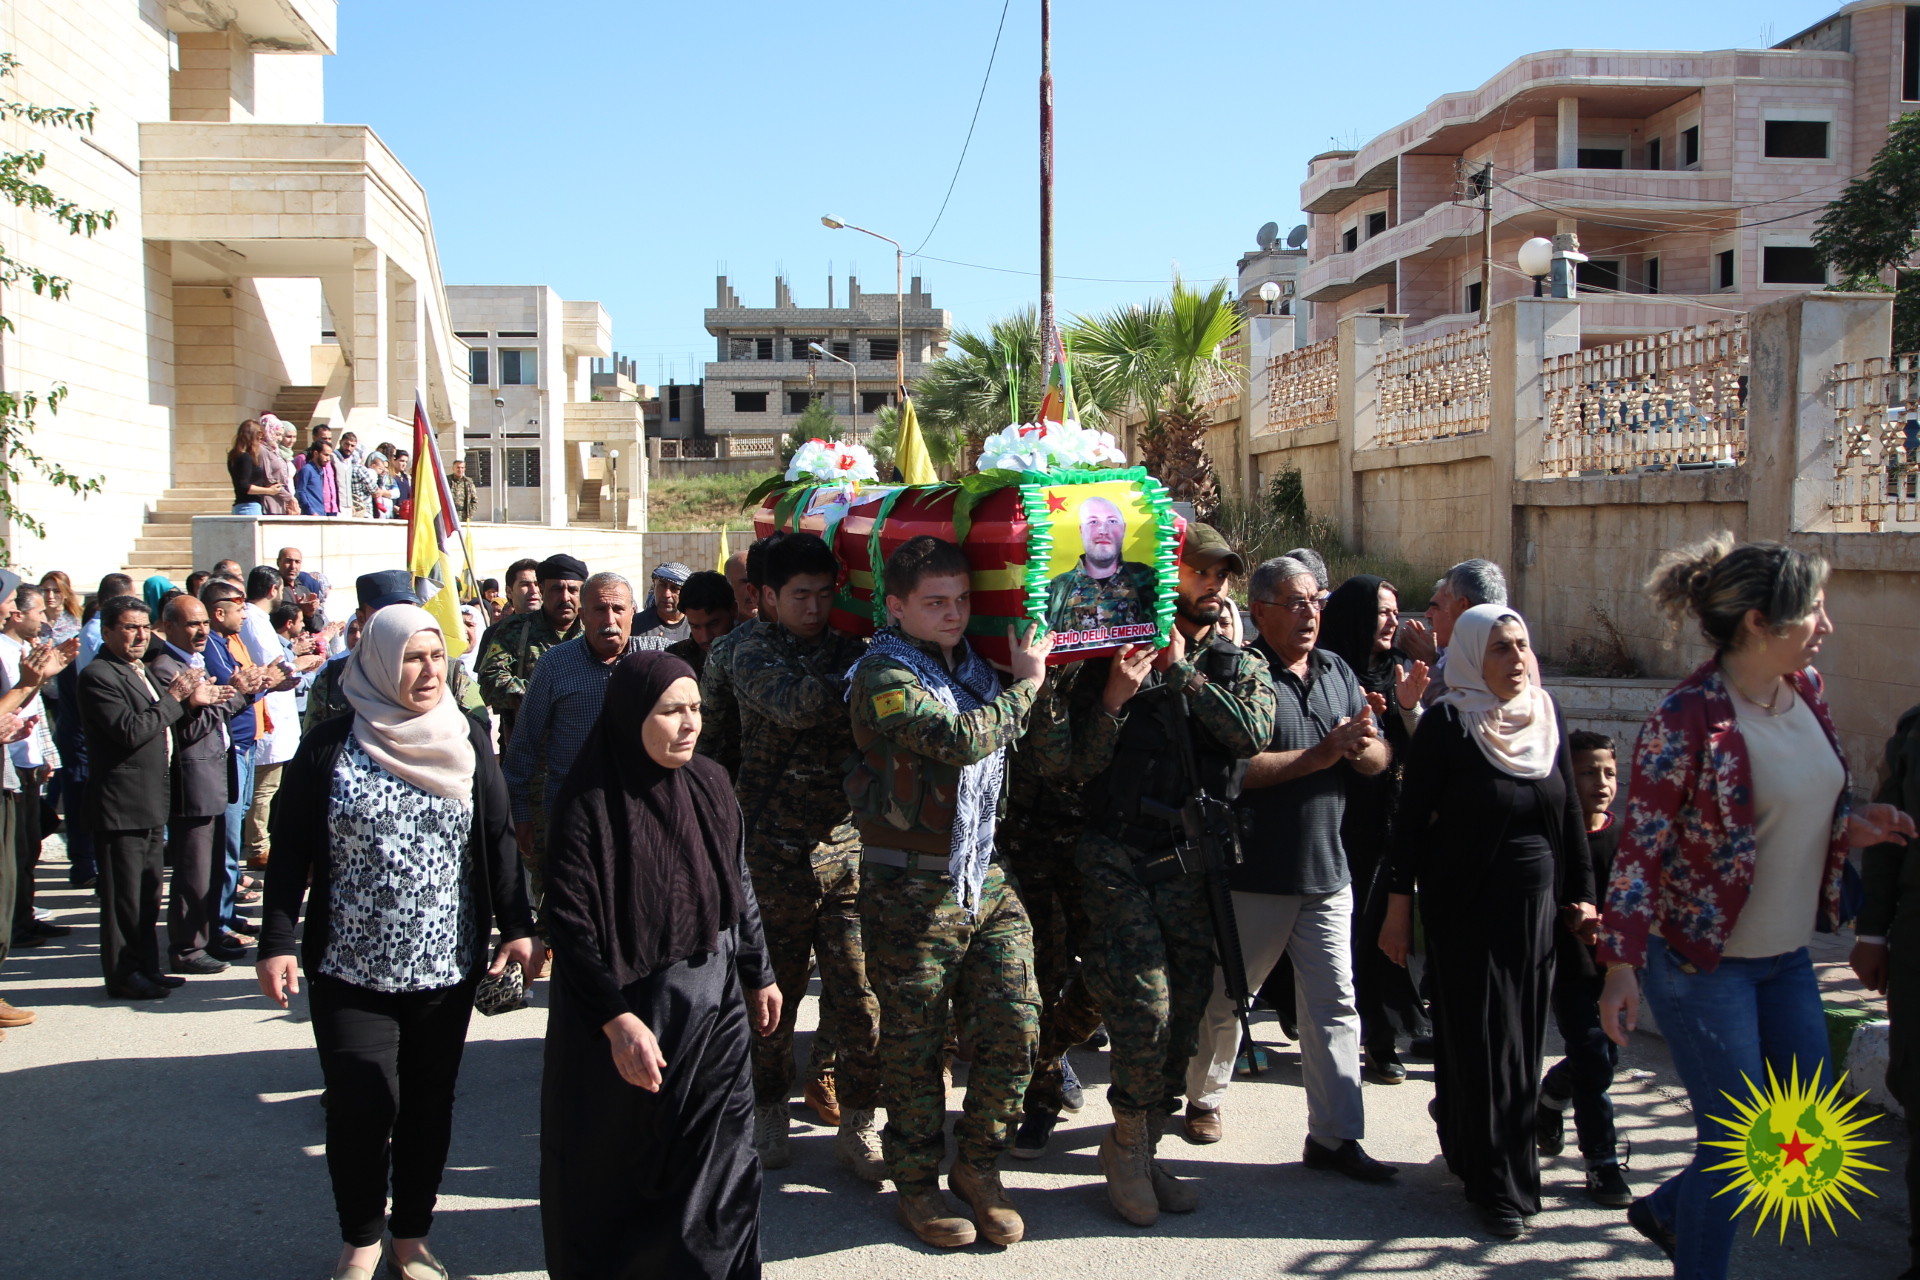 Gallery of the Funeral of Şehid Delil Emerica and statement from YPG